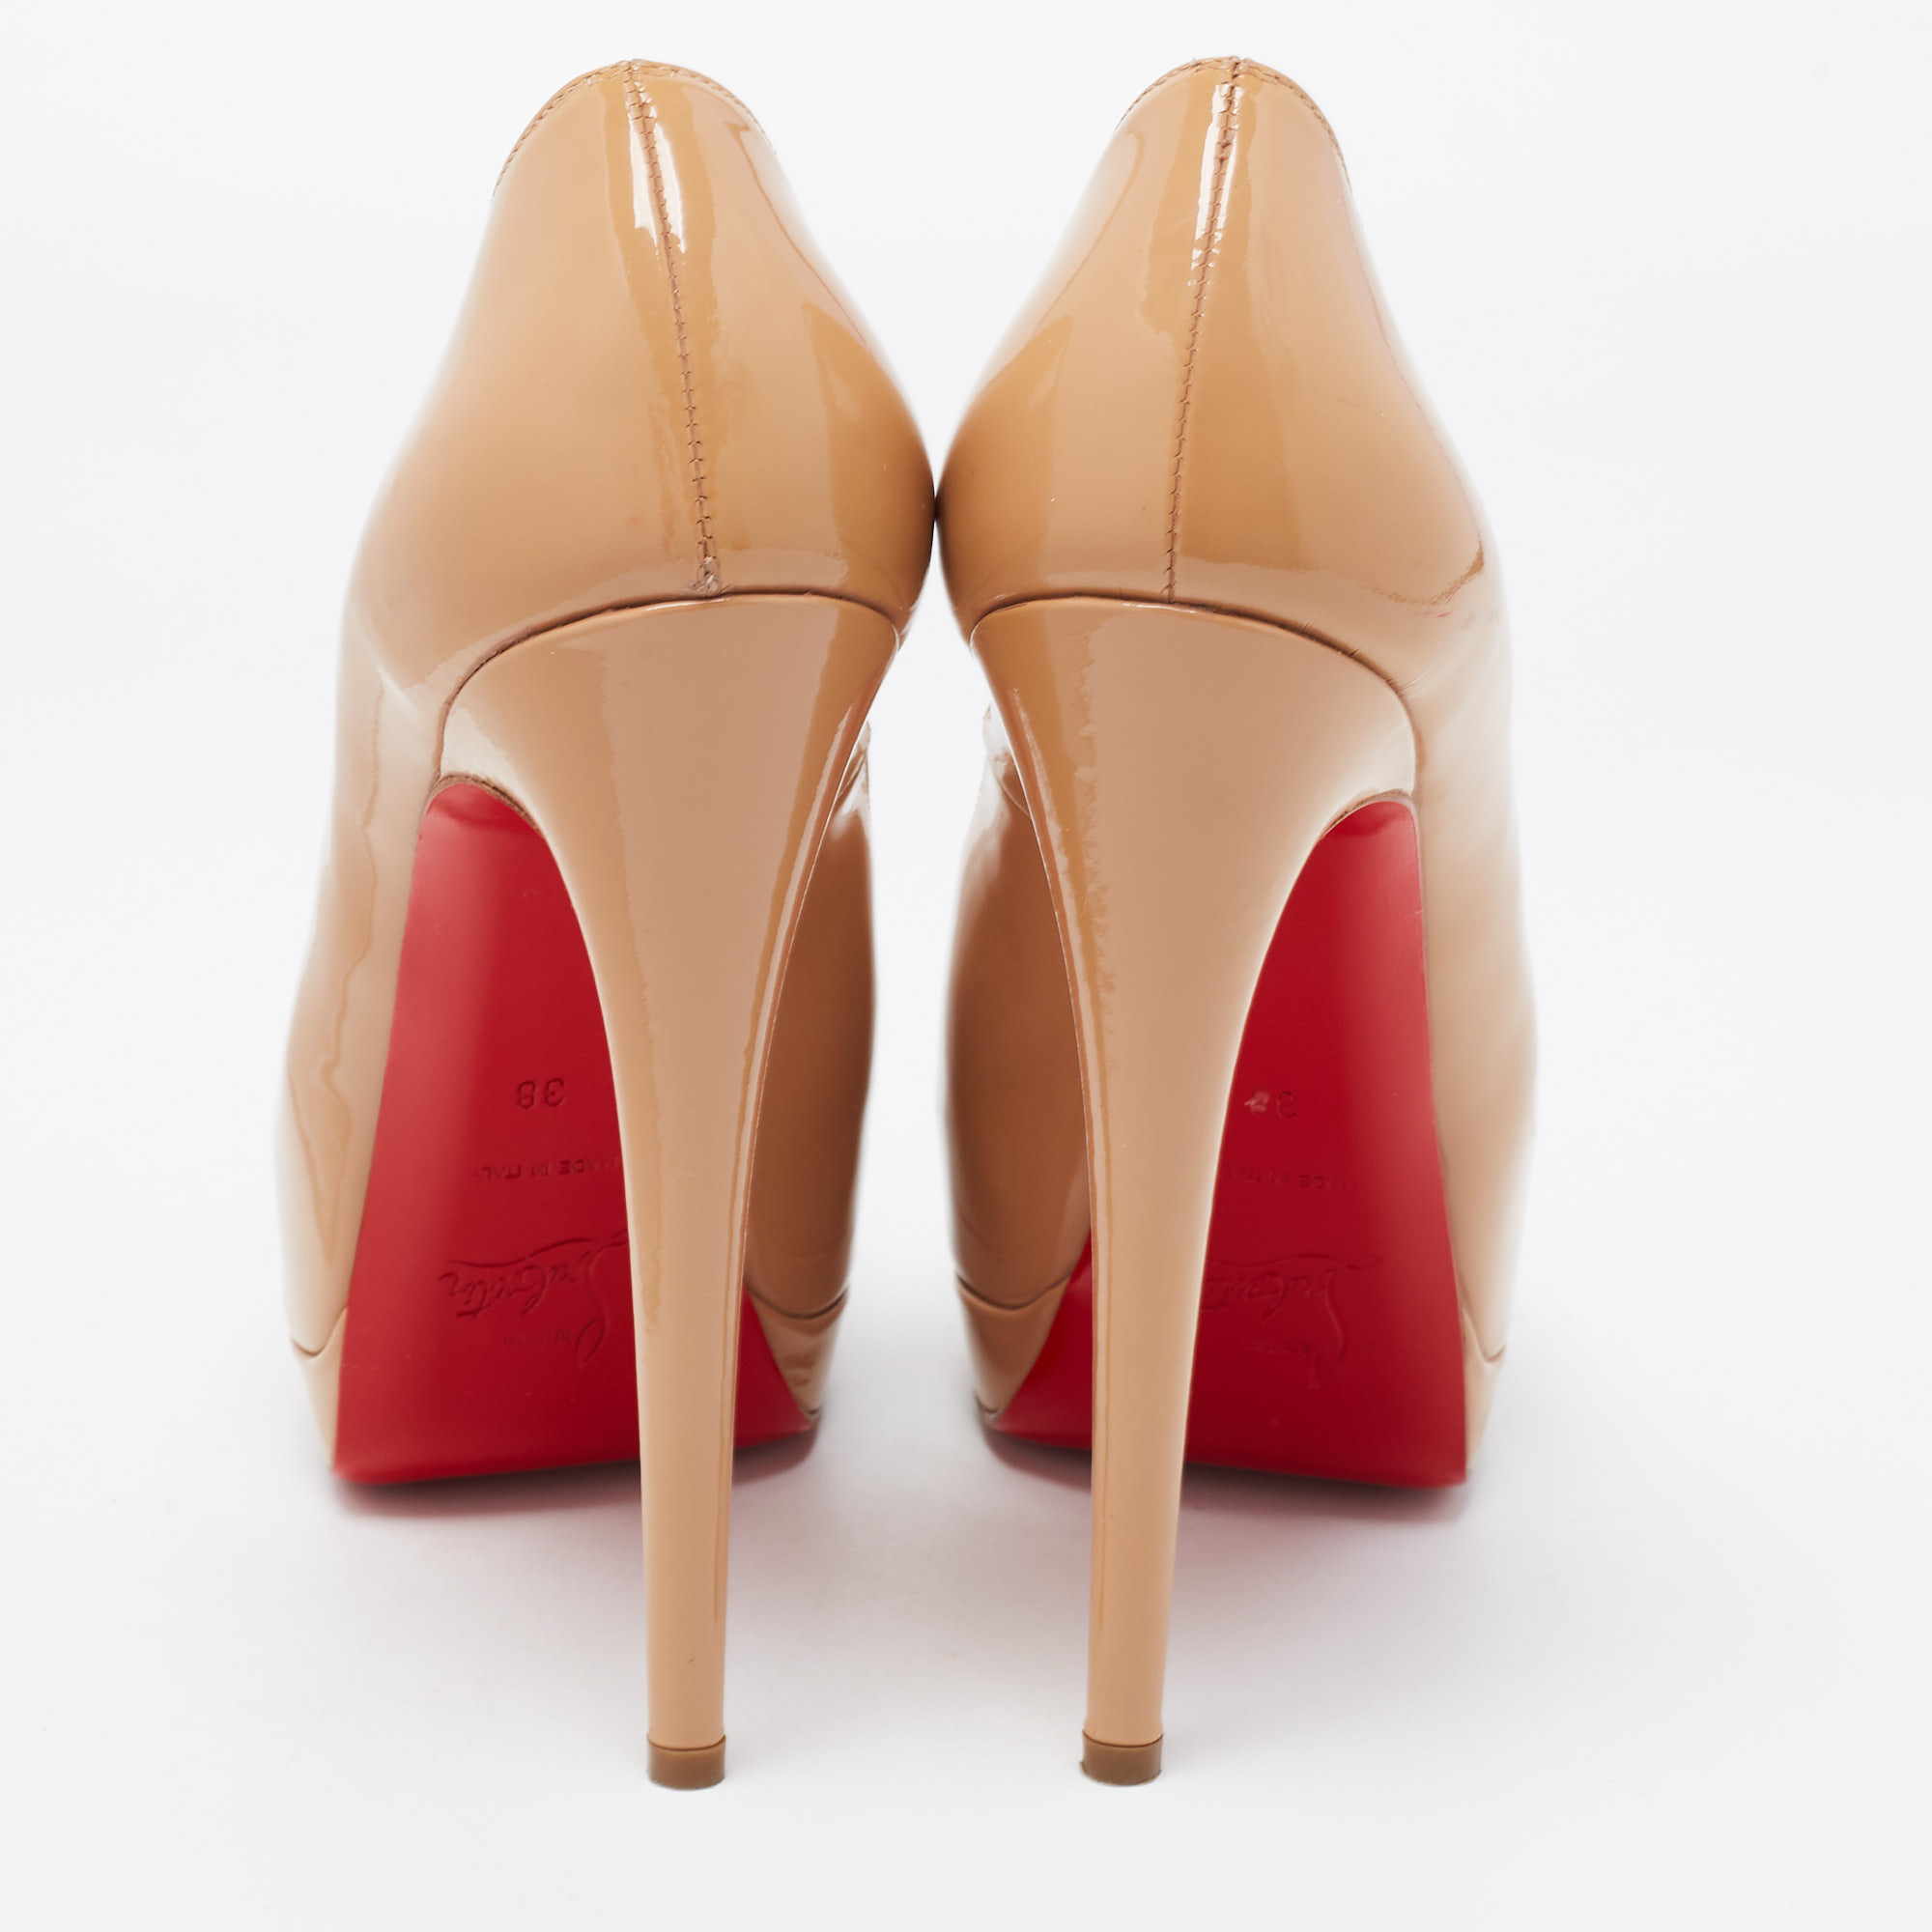 Christian Louboutin Beige Patent Very Prive Pumps Size 38